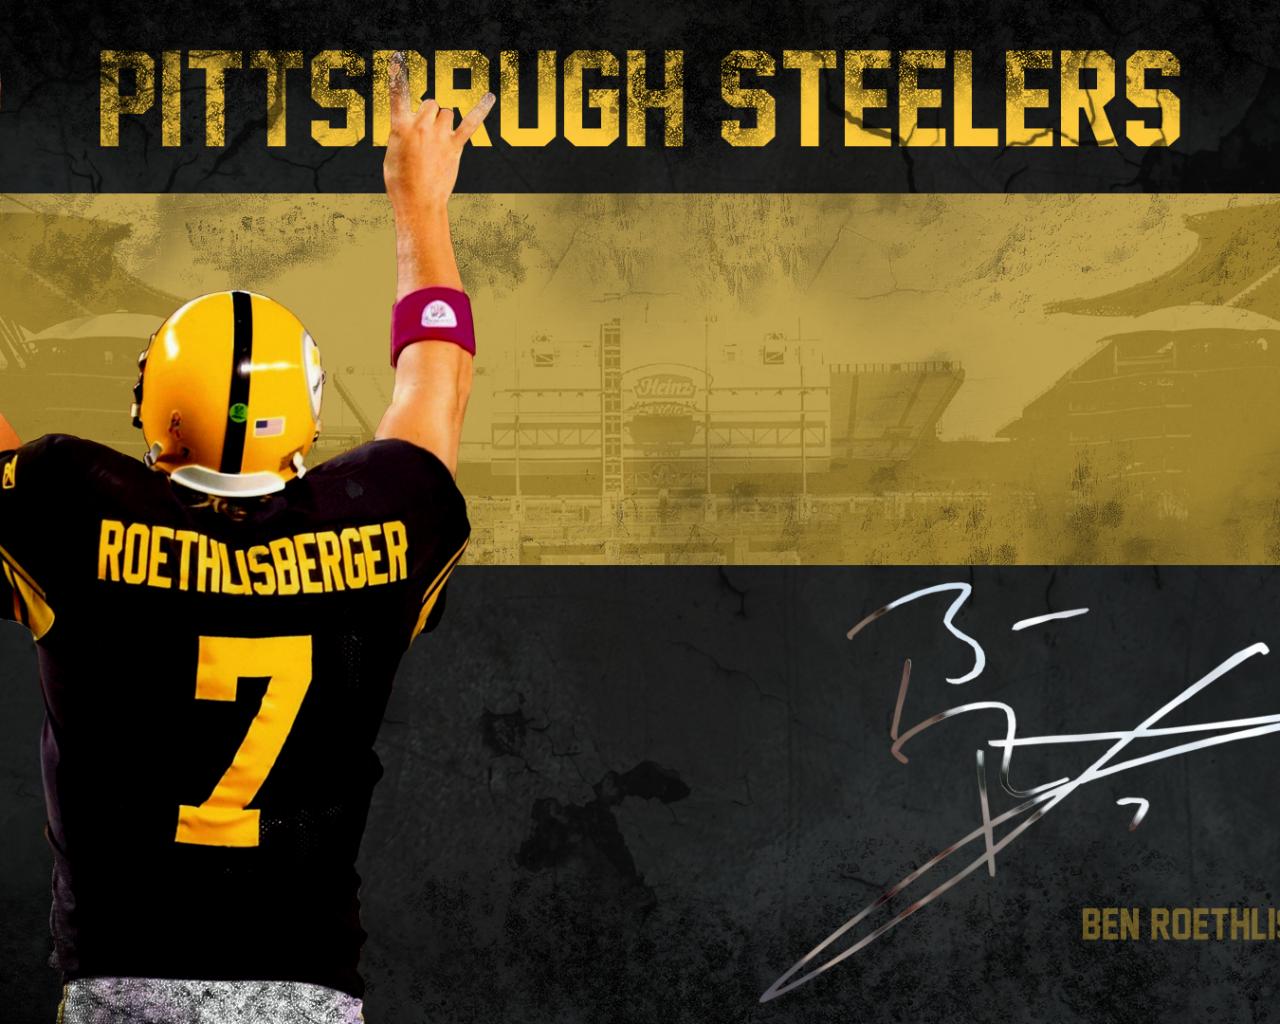 Steelers Backgrounds - Wallpaper Cave